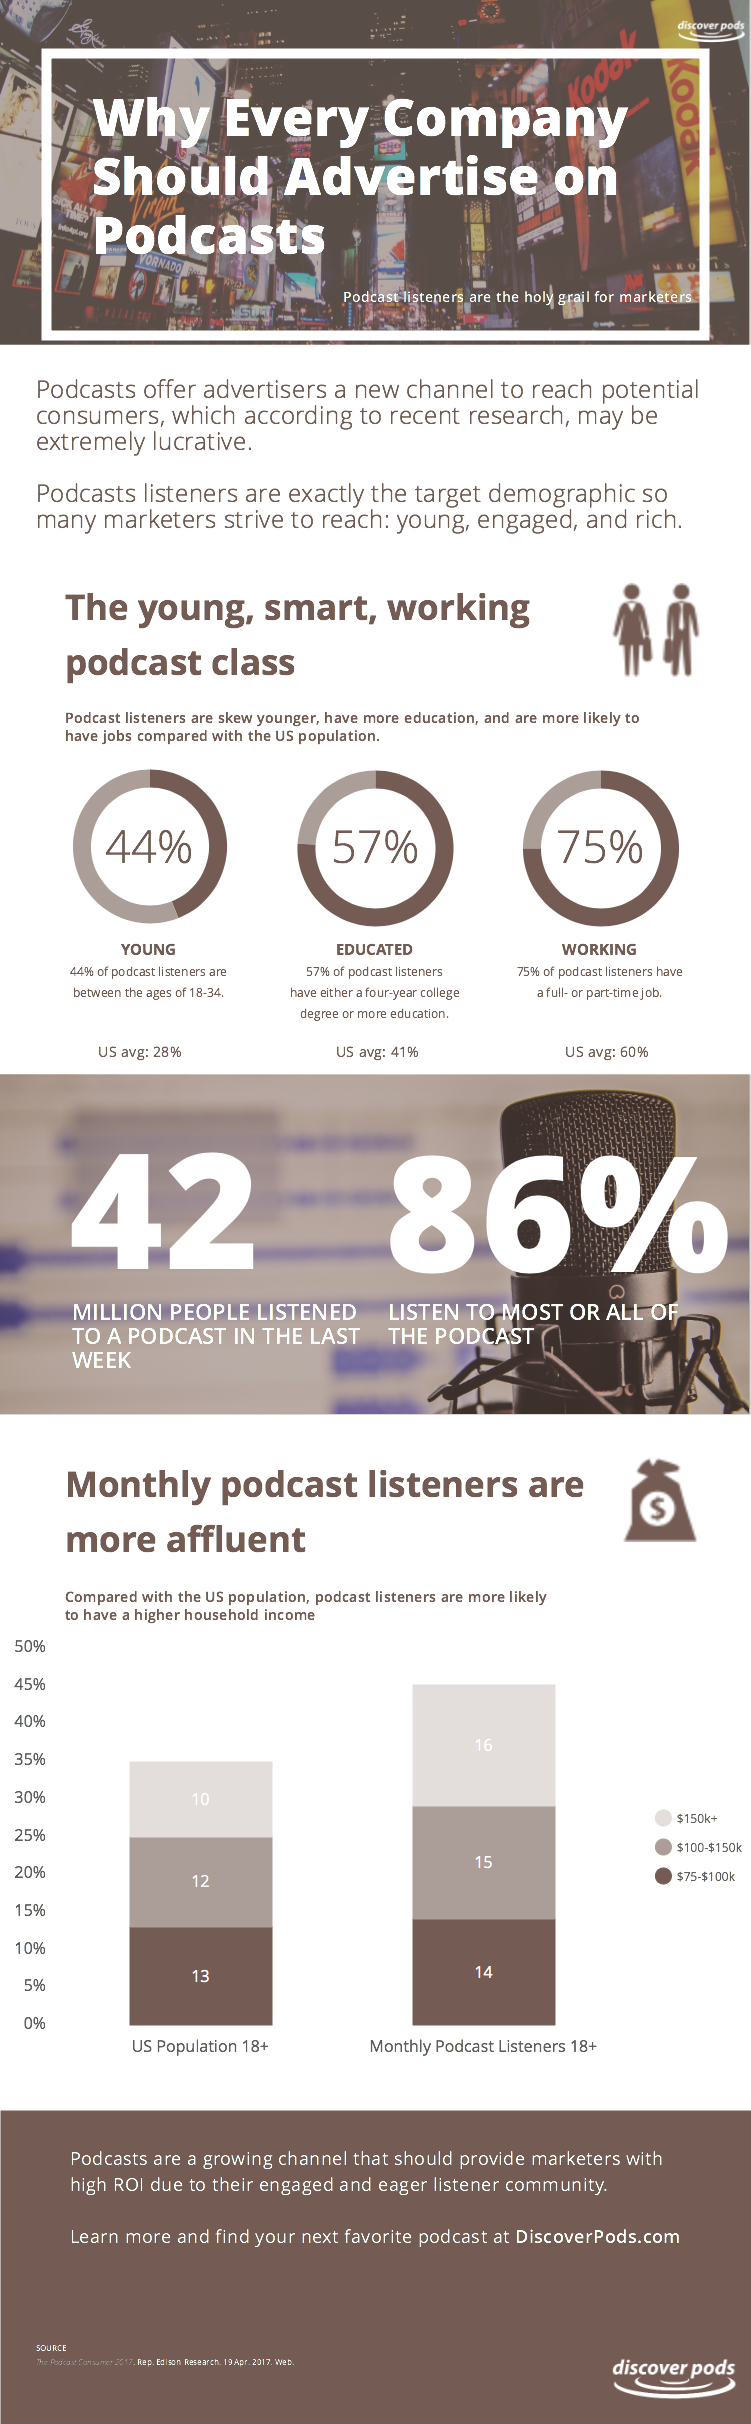 Why Every B2C Company Should Advertise on Podcasts [Infographic]